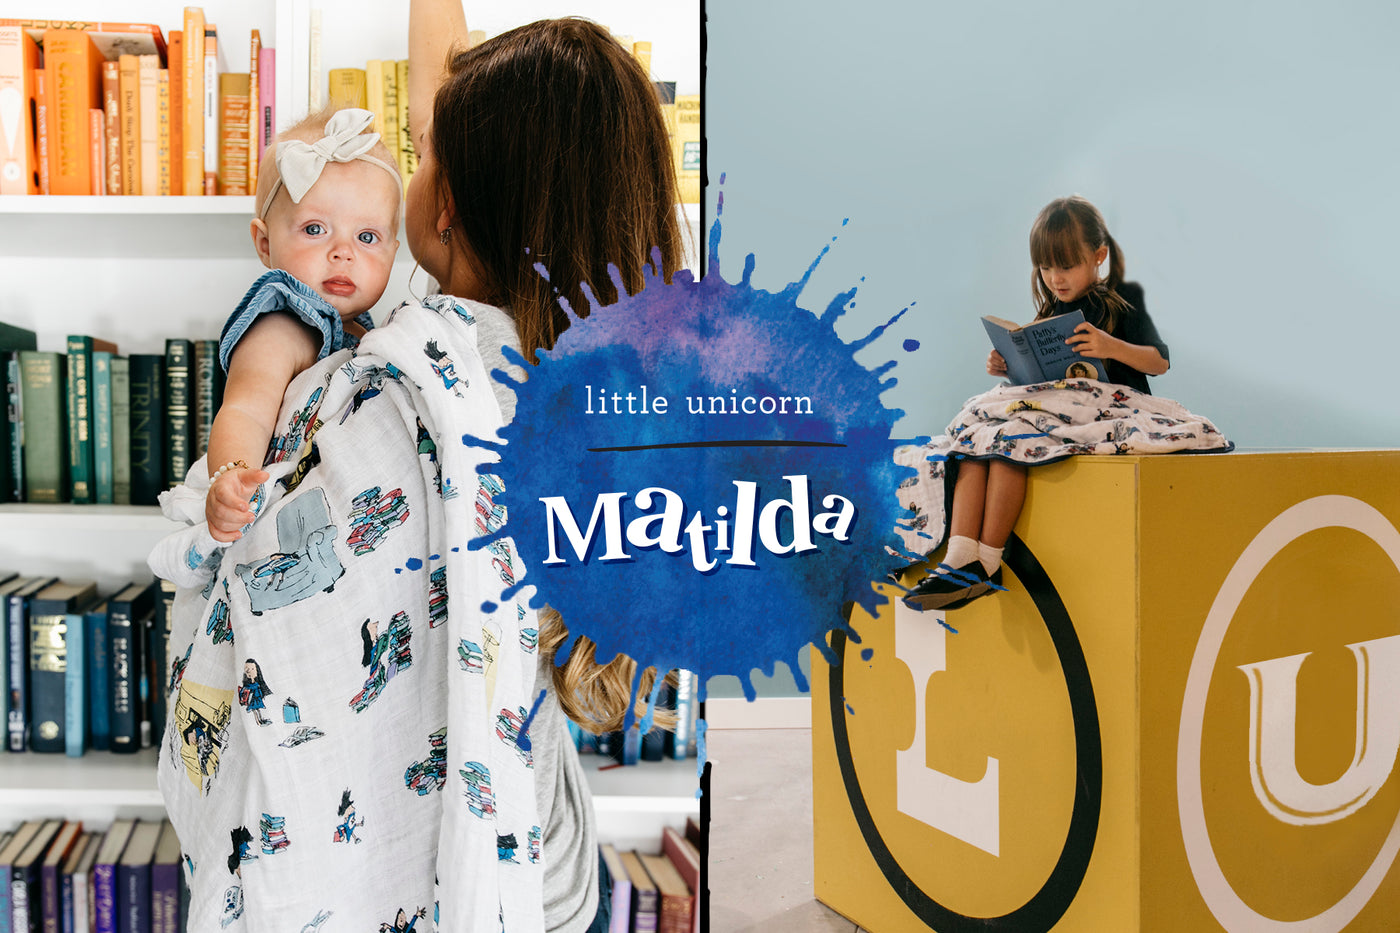 <style color="white" font-size="1px">Matilda</style>